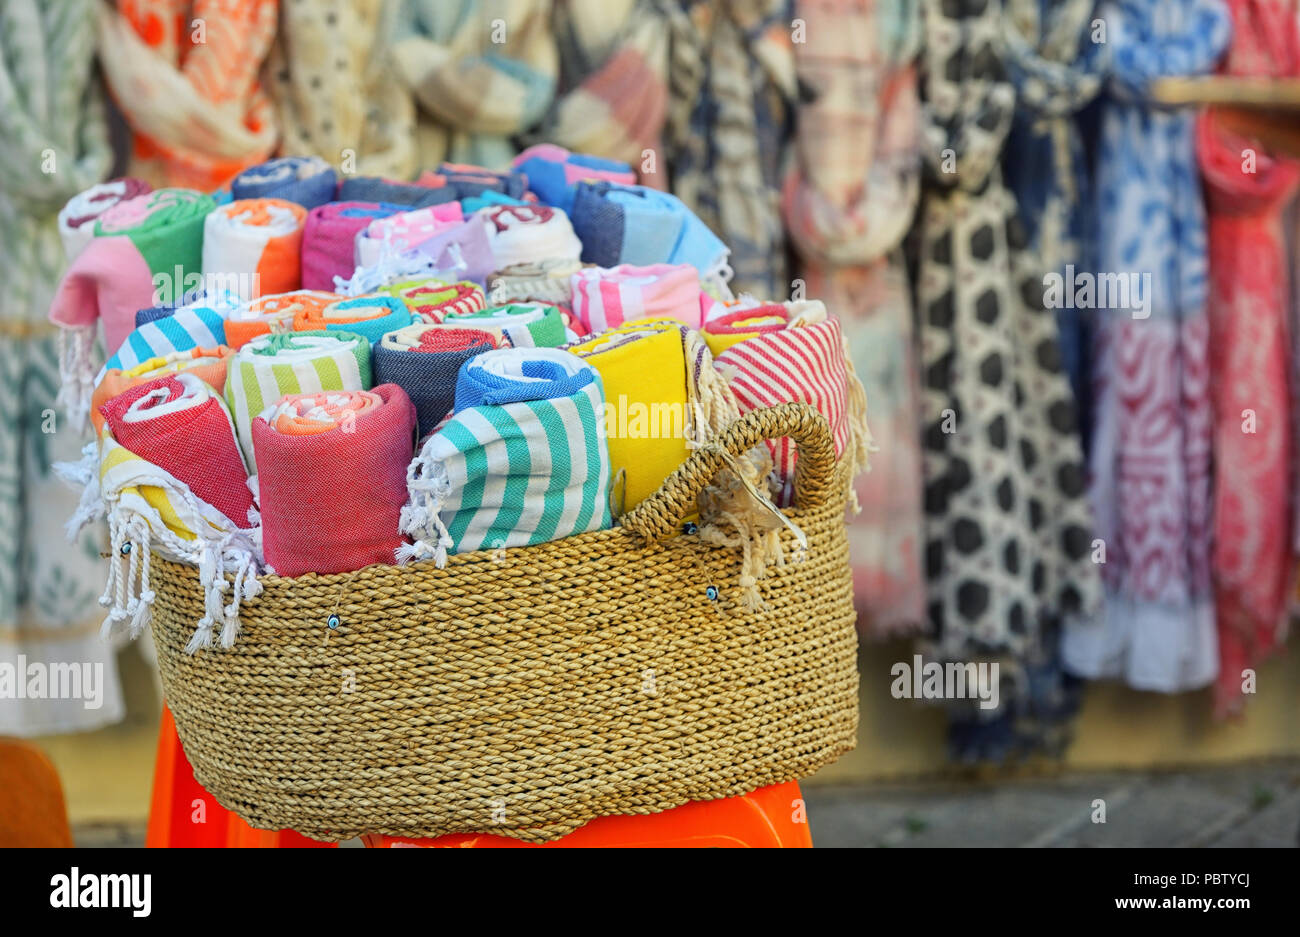 Beach towels displayed in a souvenir shop in Greece Stock Photo - Alamy